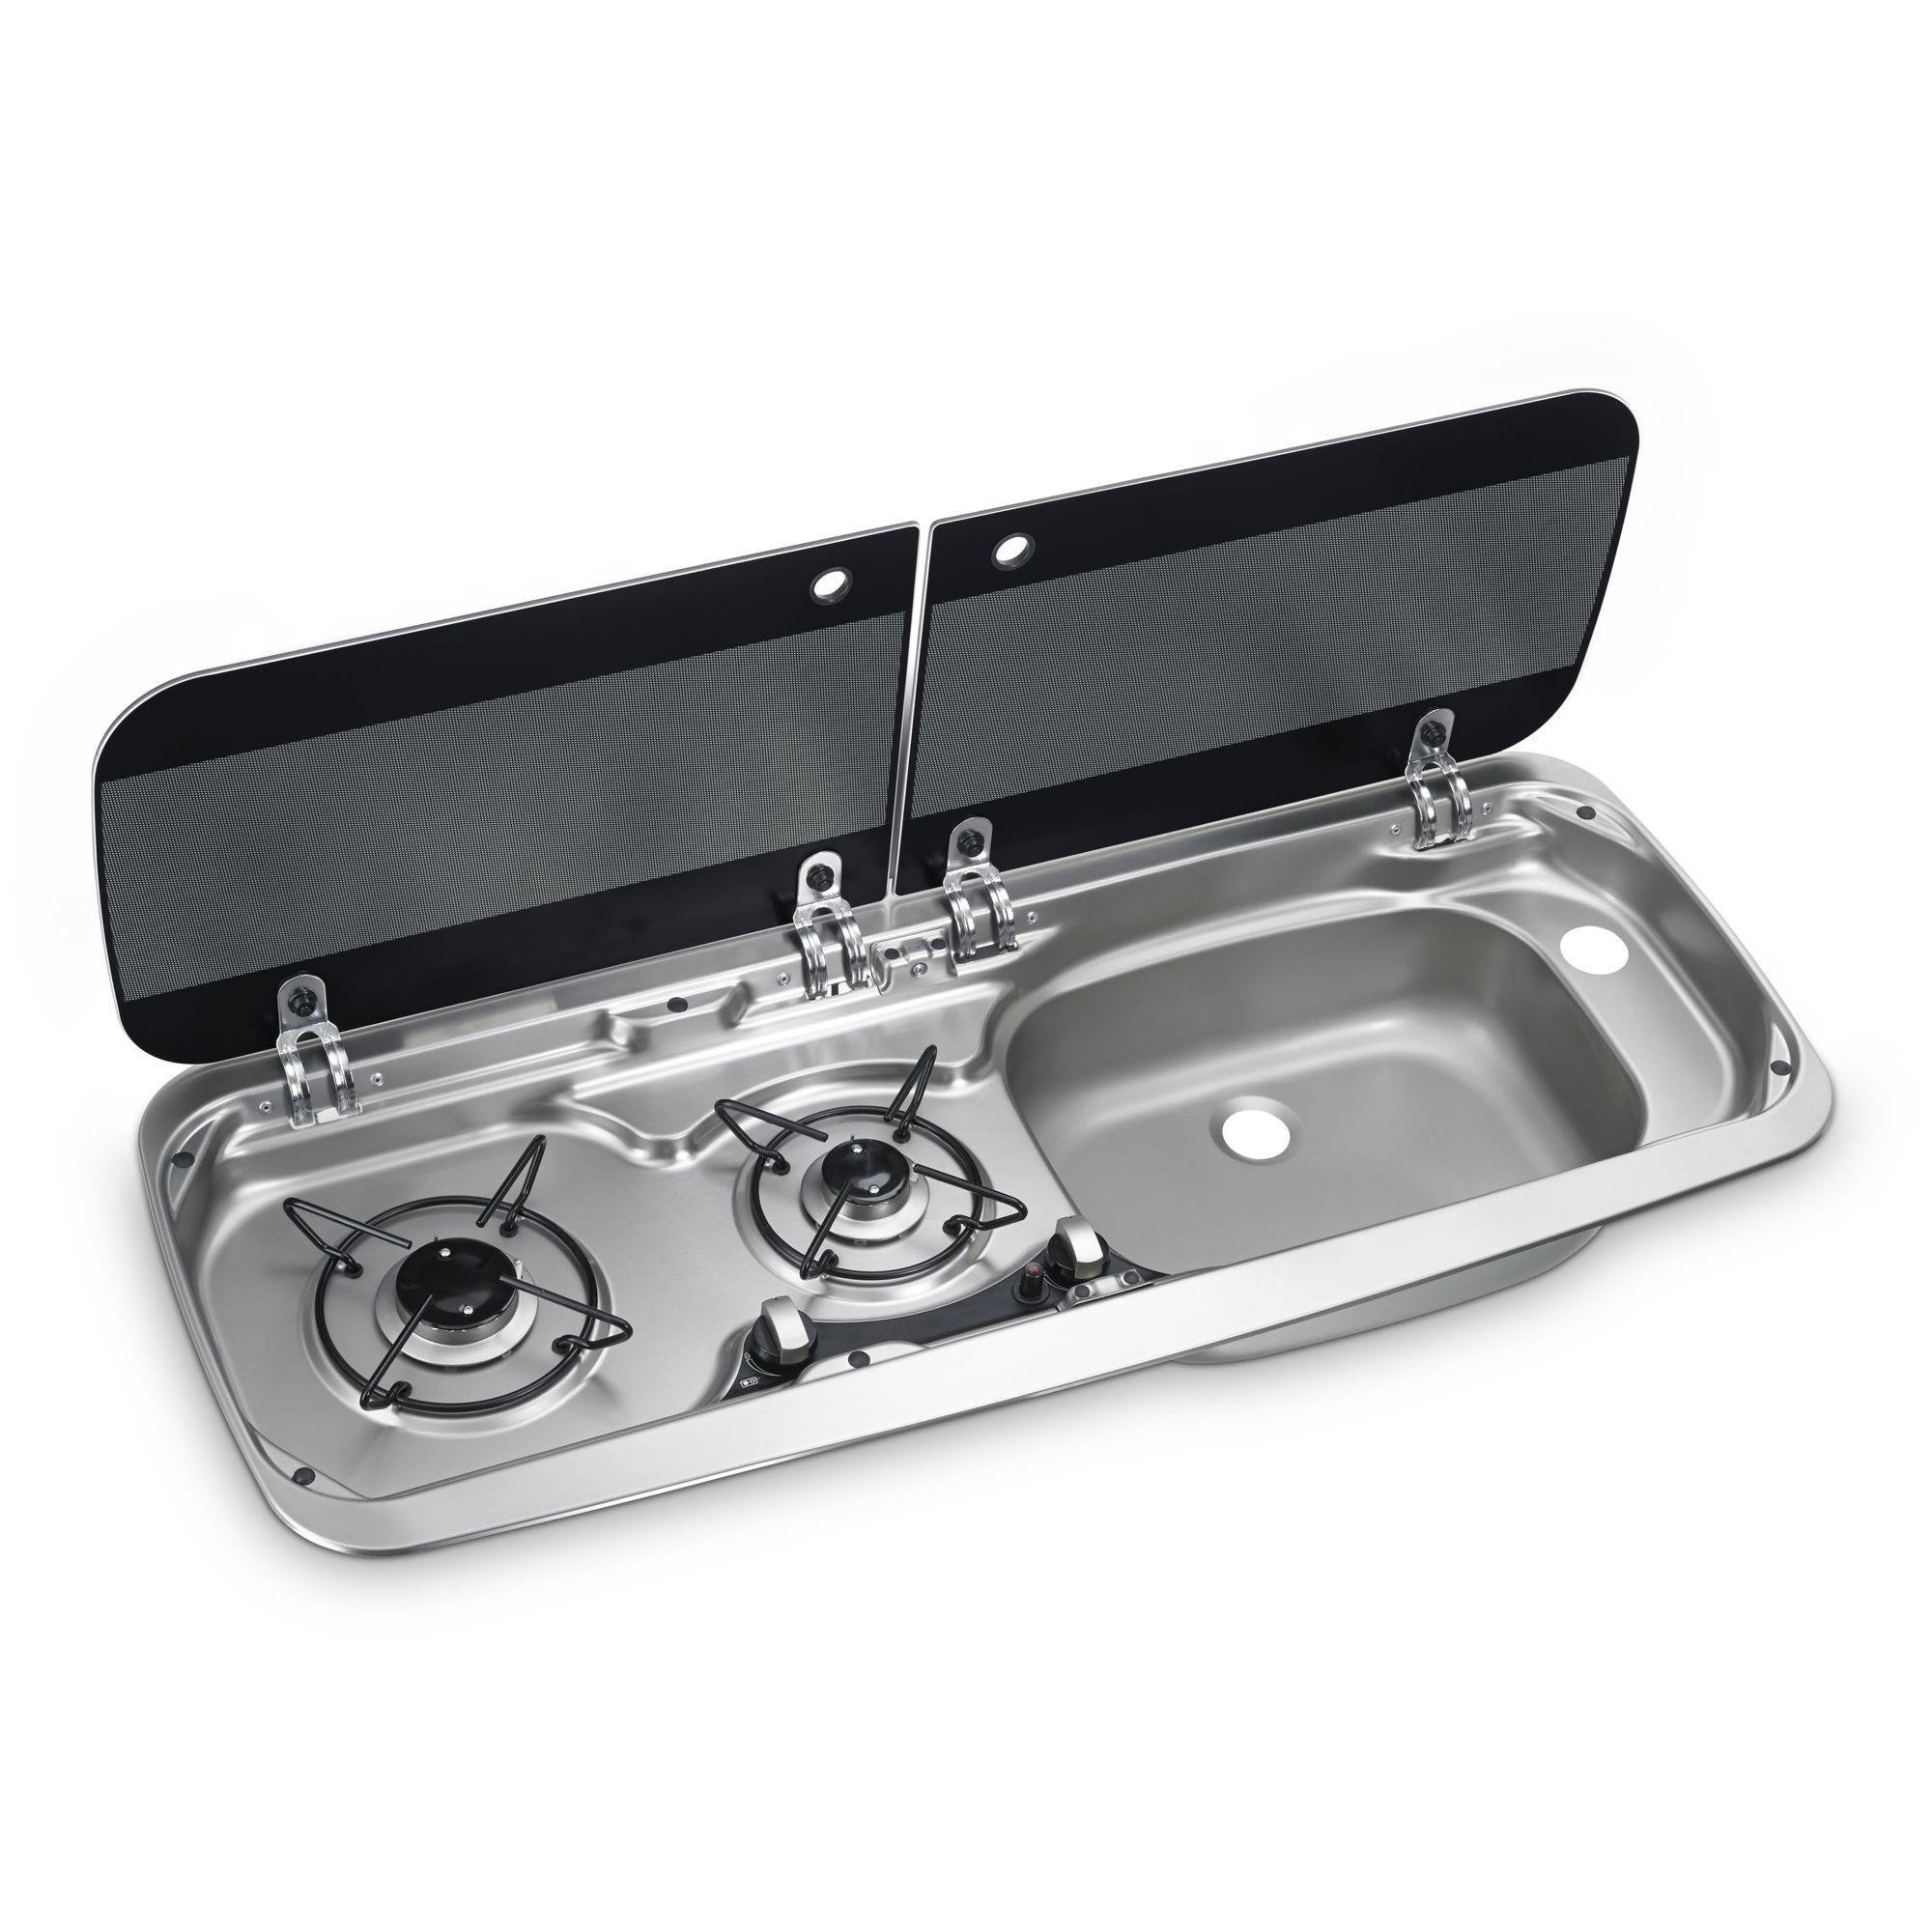 Dometic HSG 2370R 2-burner gas hob and sink (right) combination with glass lid